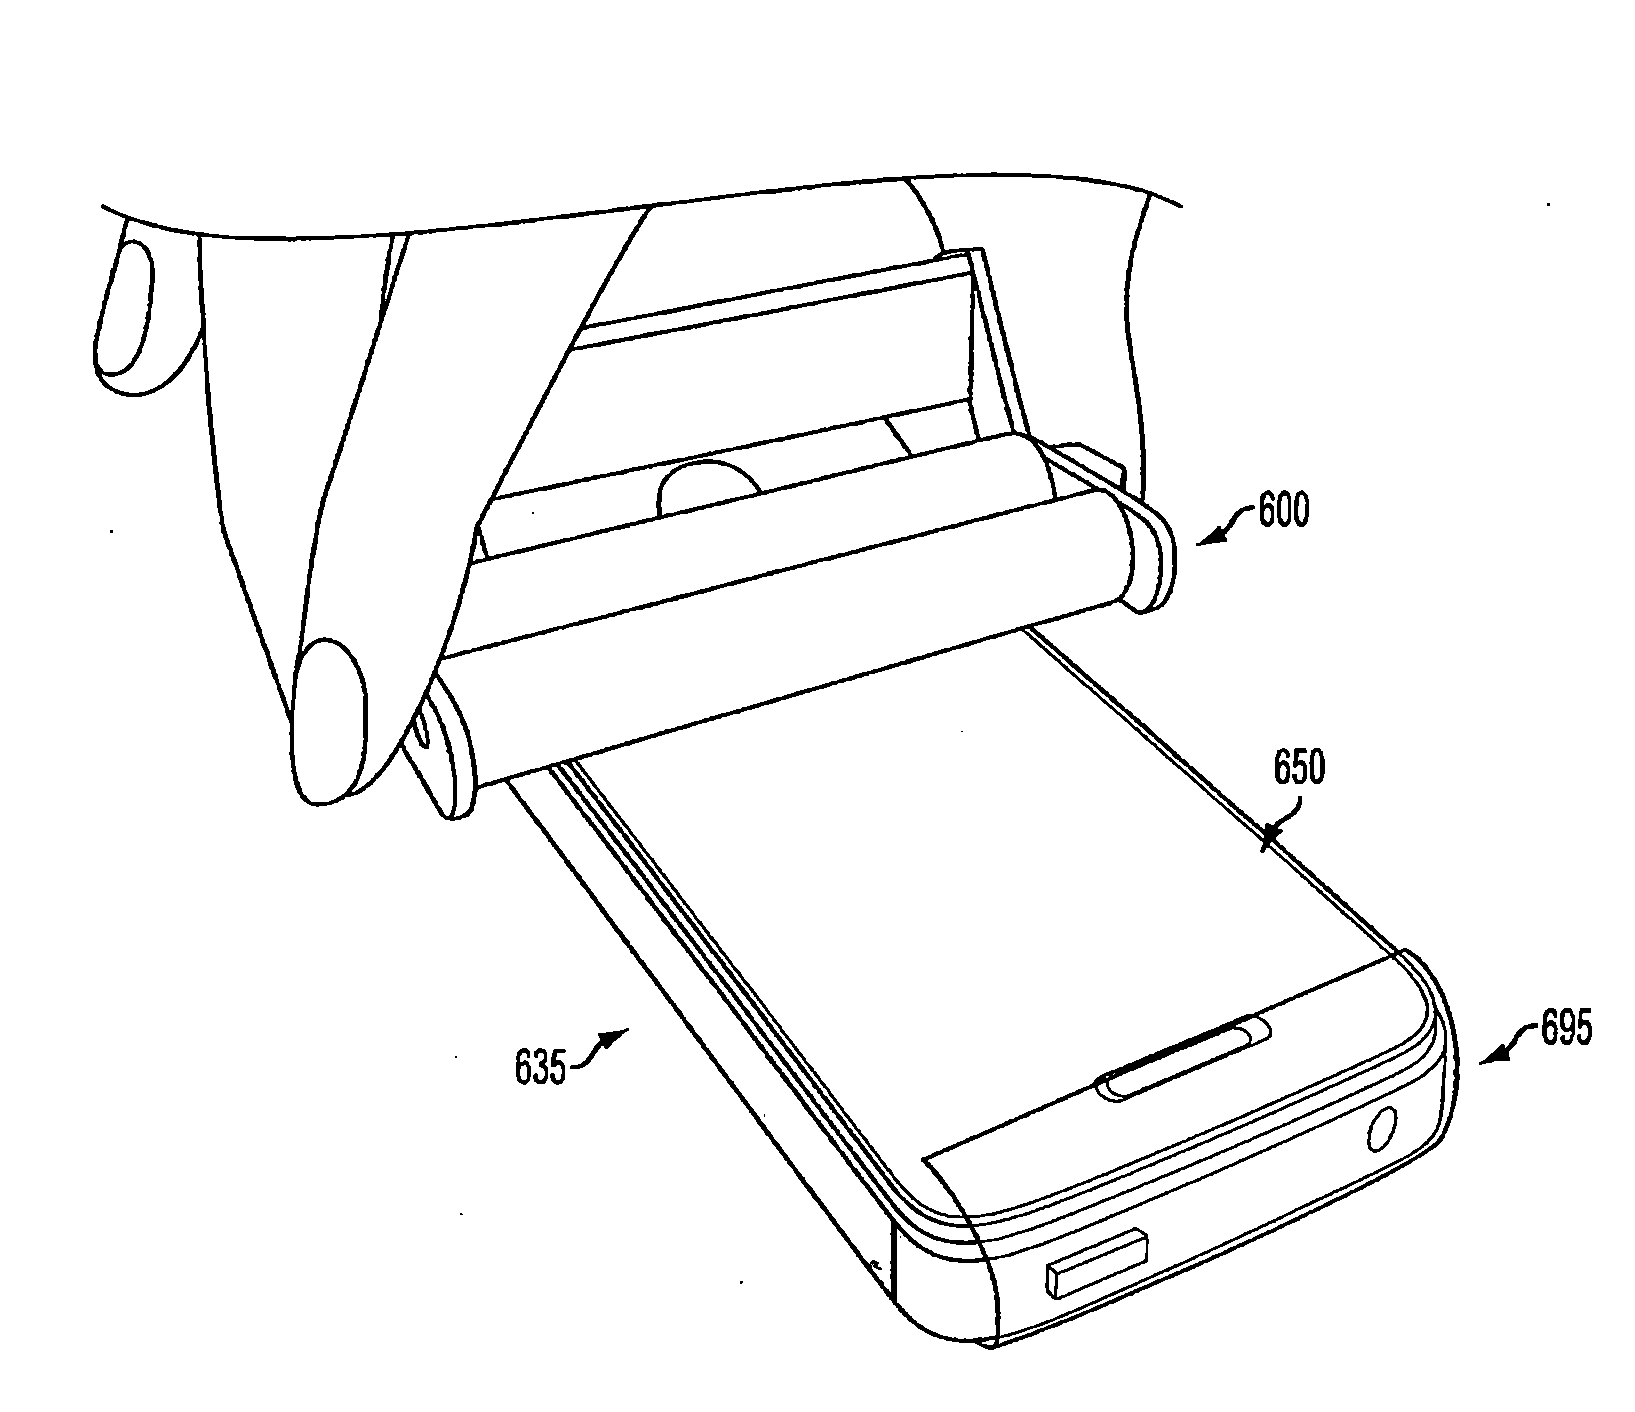 Protective material applicator device